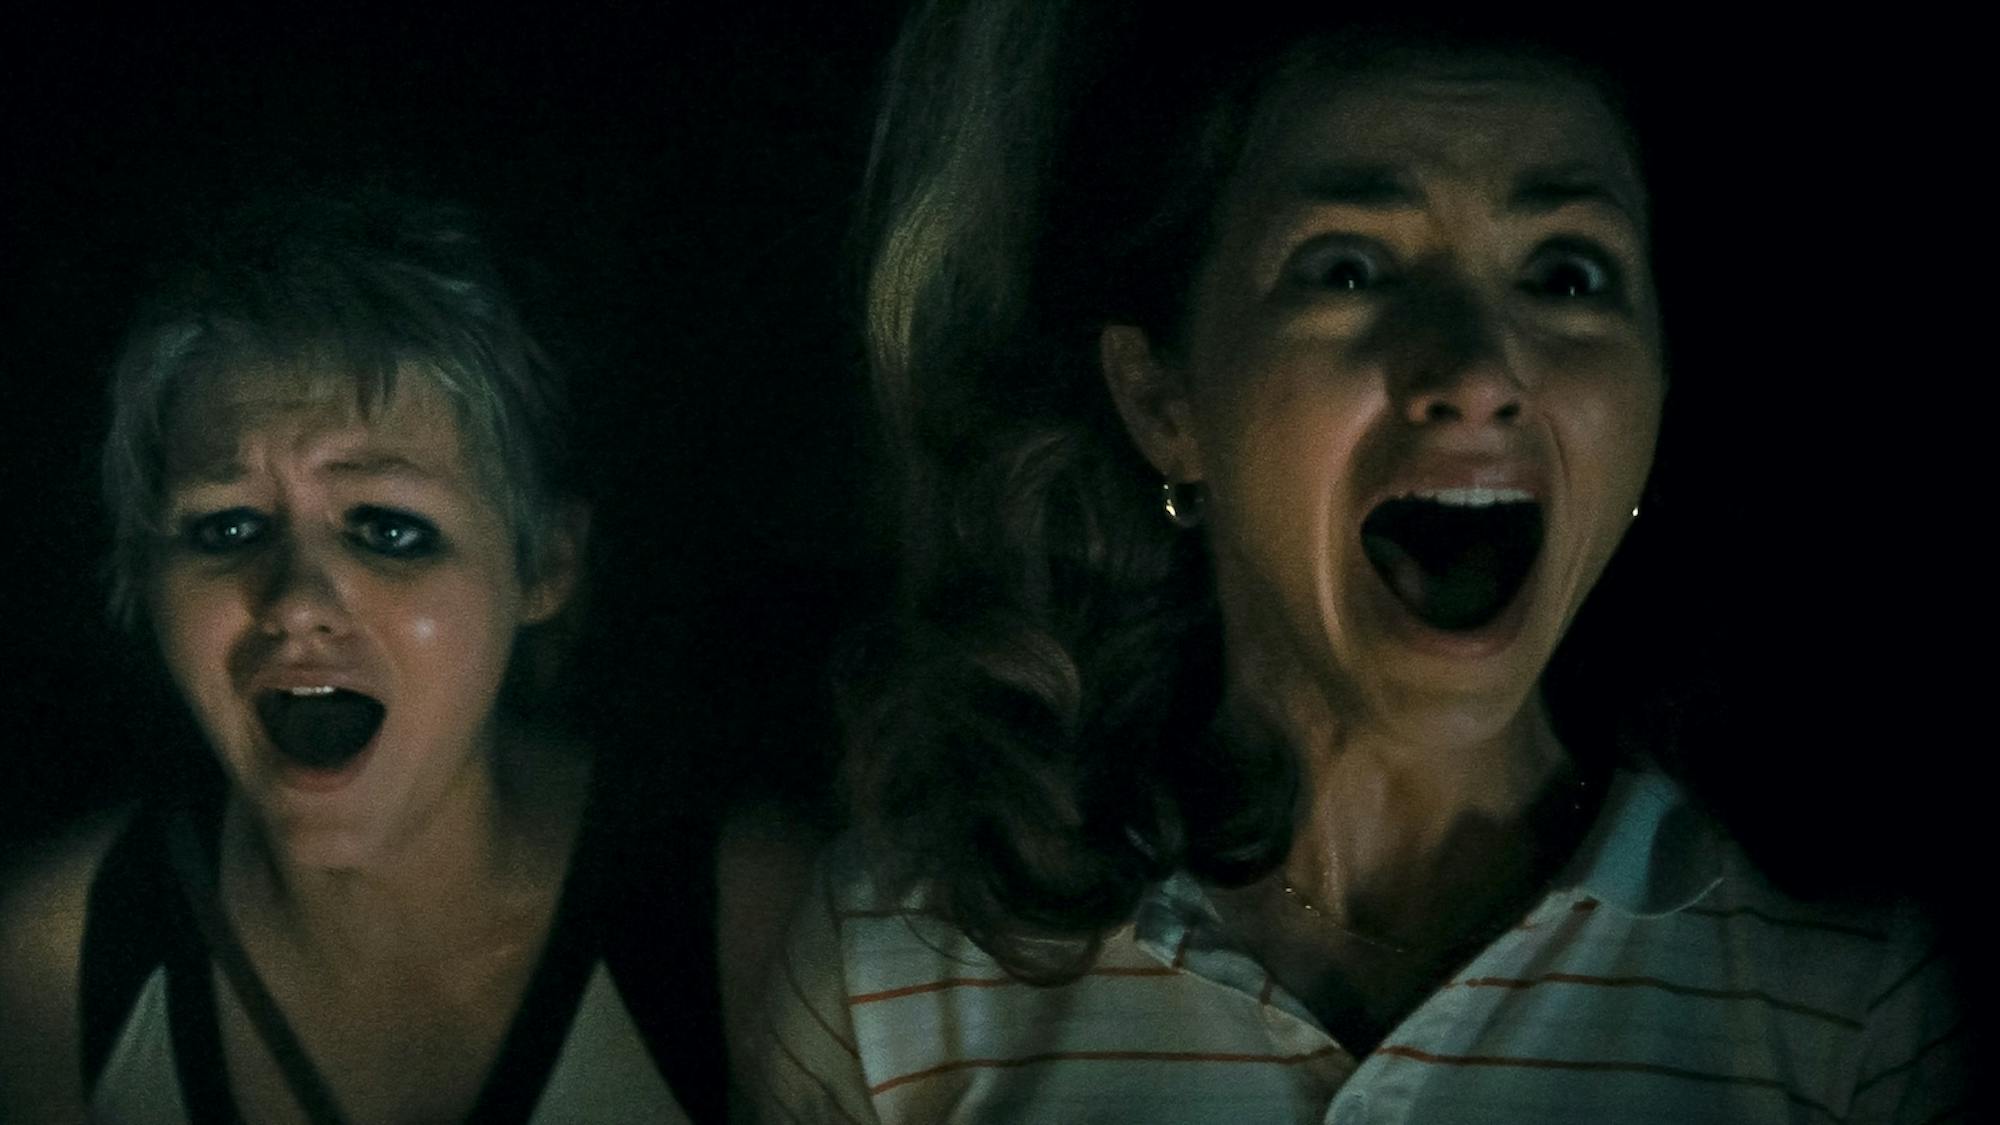 Alice (Ryan Simpkins) and Cindy (Emily Rudd) in a dark shot, with wide open mouths screaming.